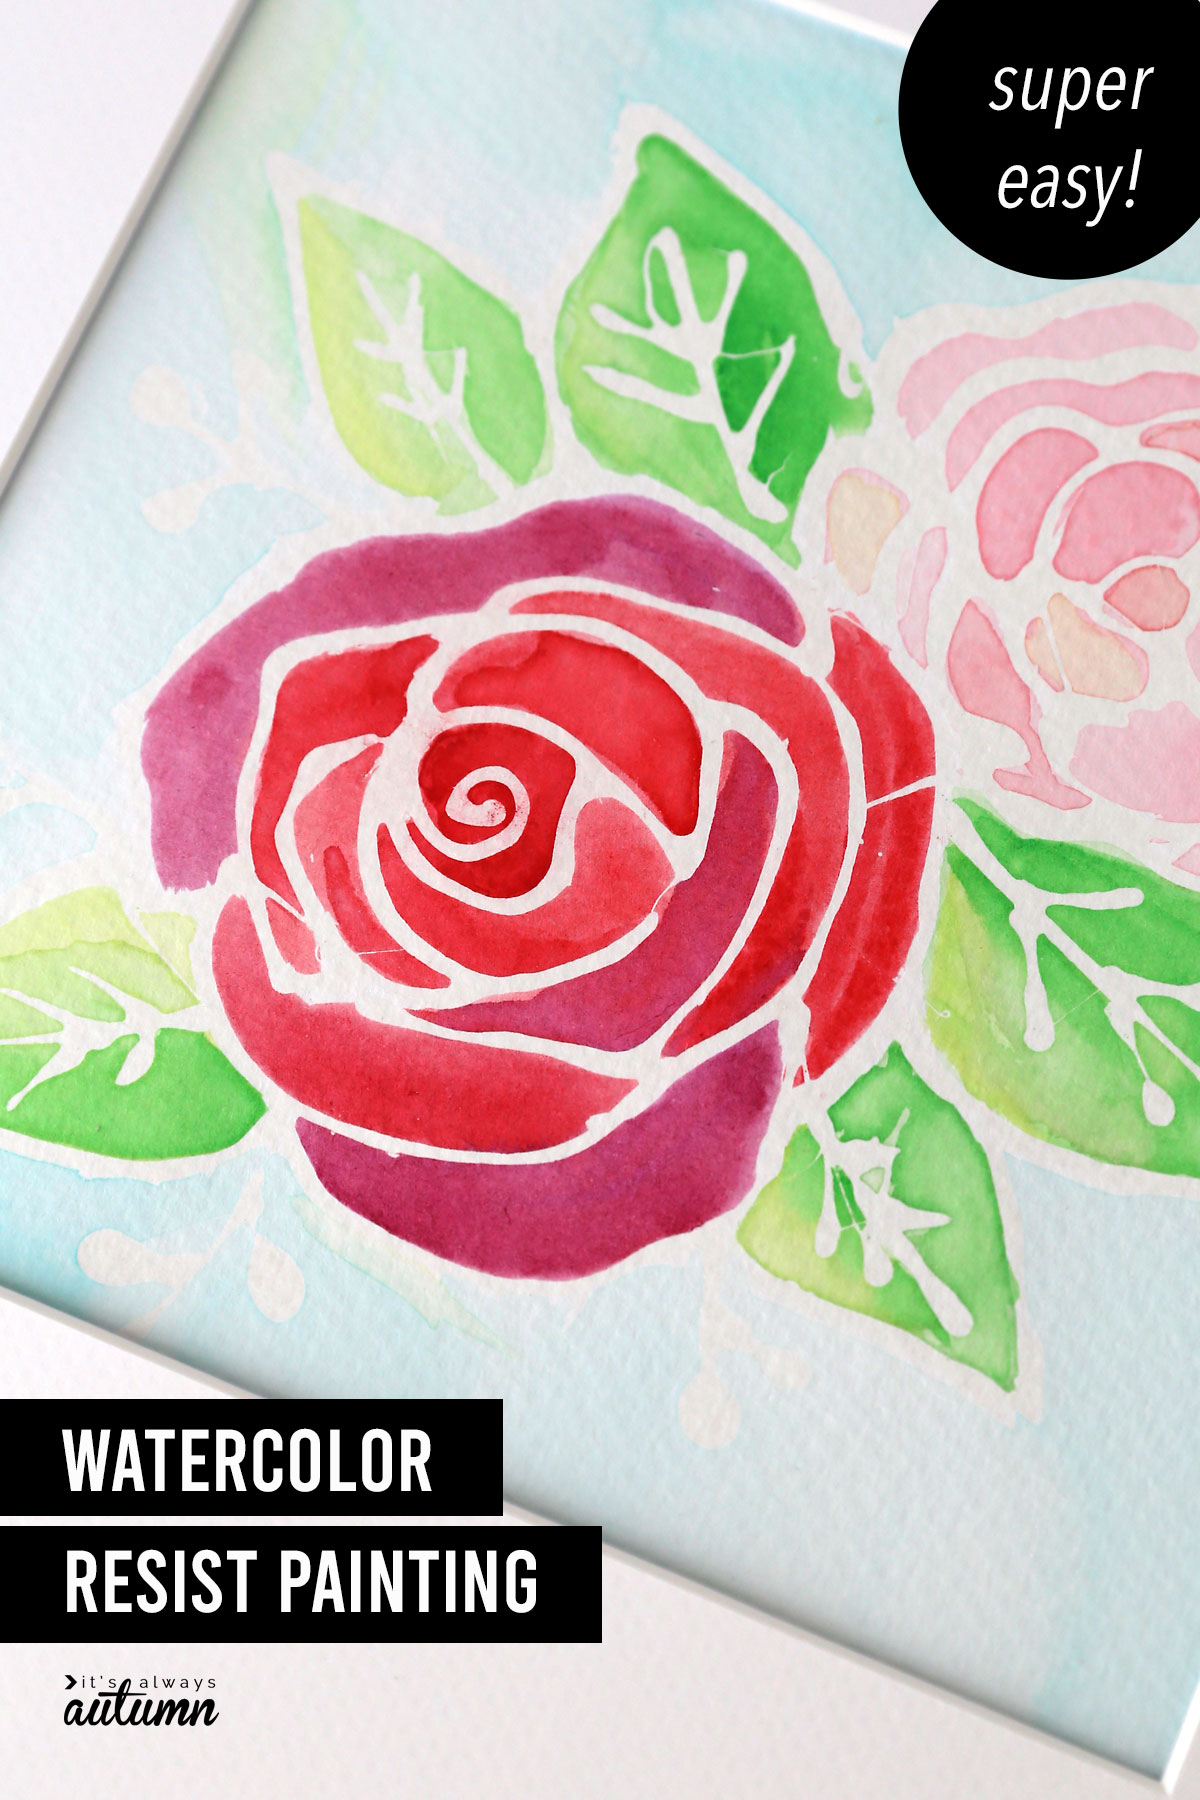 Floral painting with text: watercolor resist painting, super easy!